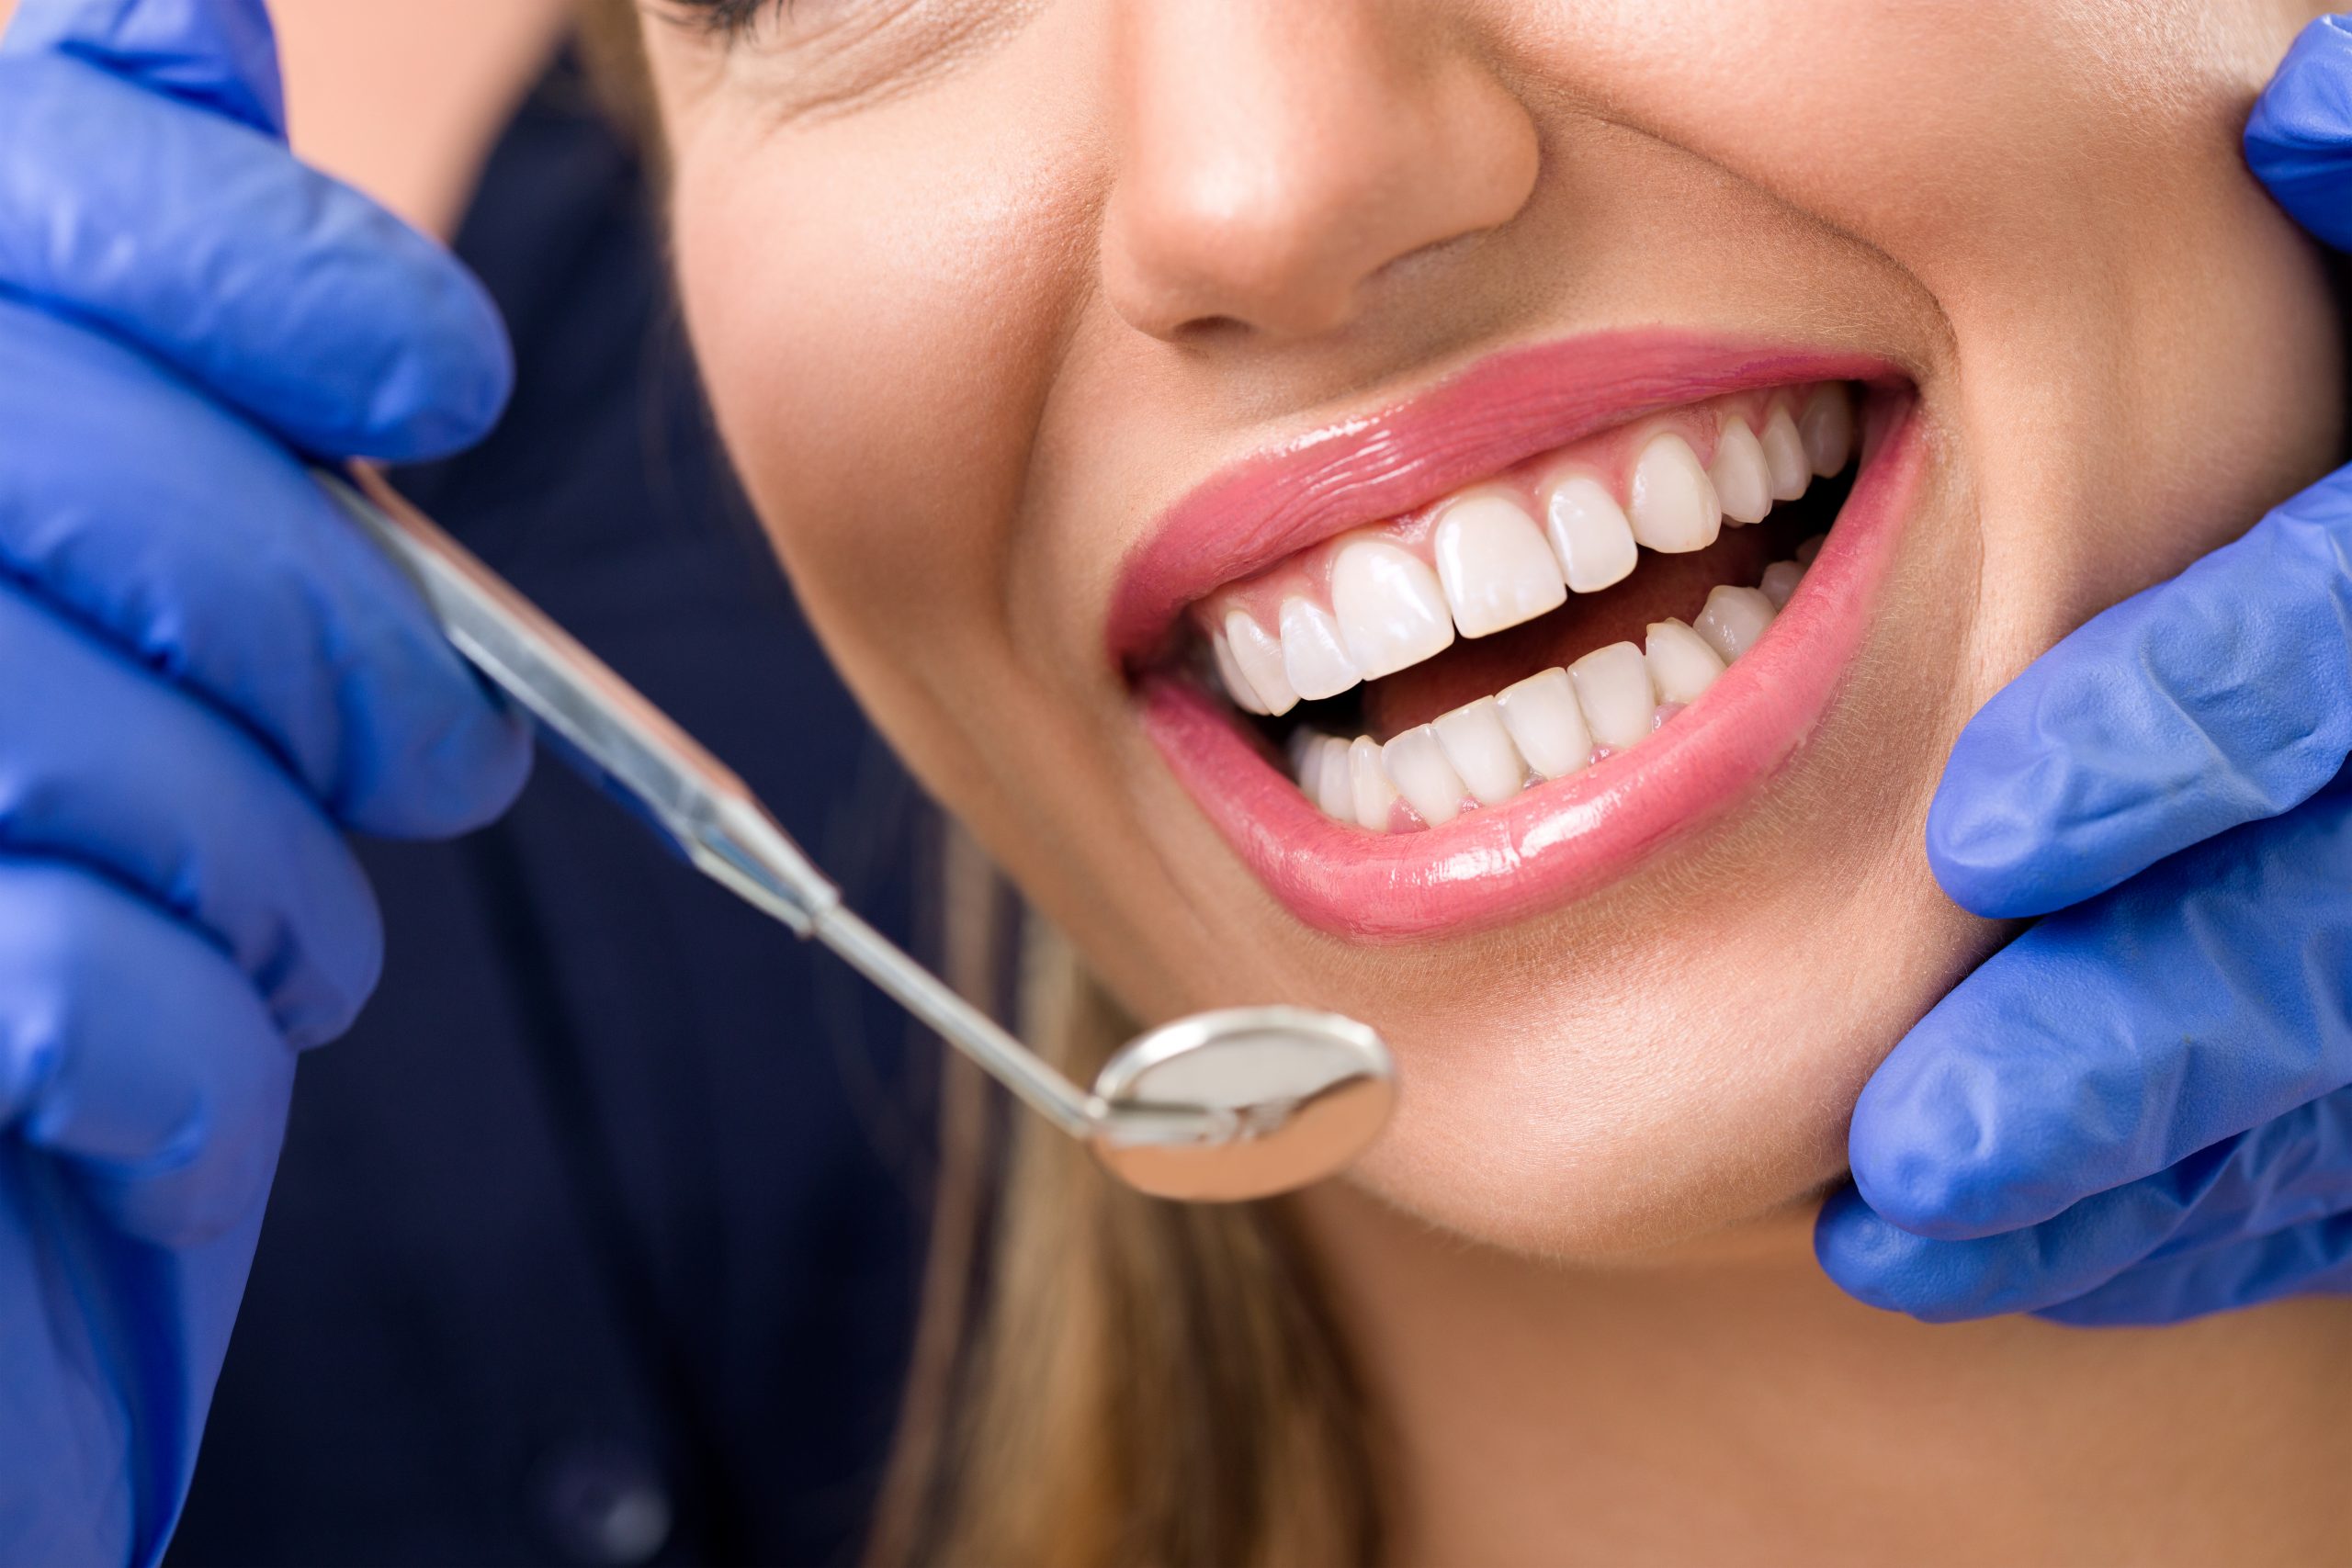 people across the UK looking to improve smiles with cosmetic dentsitry